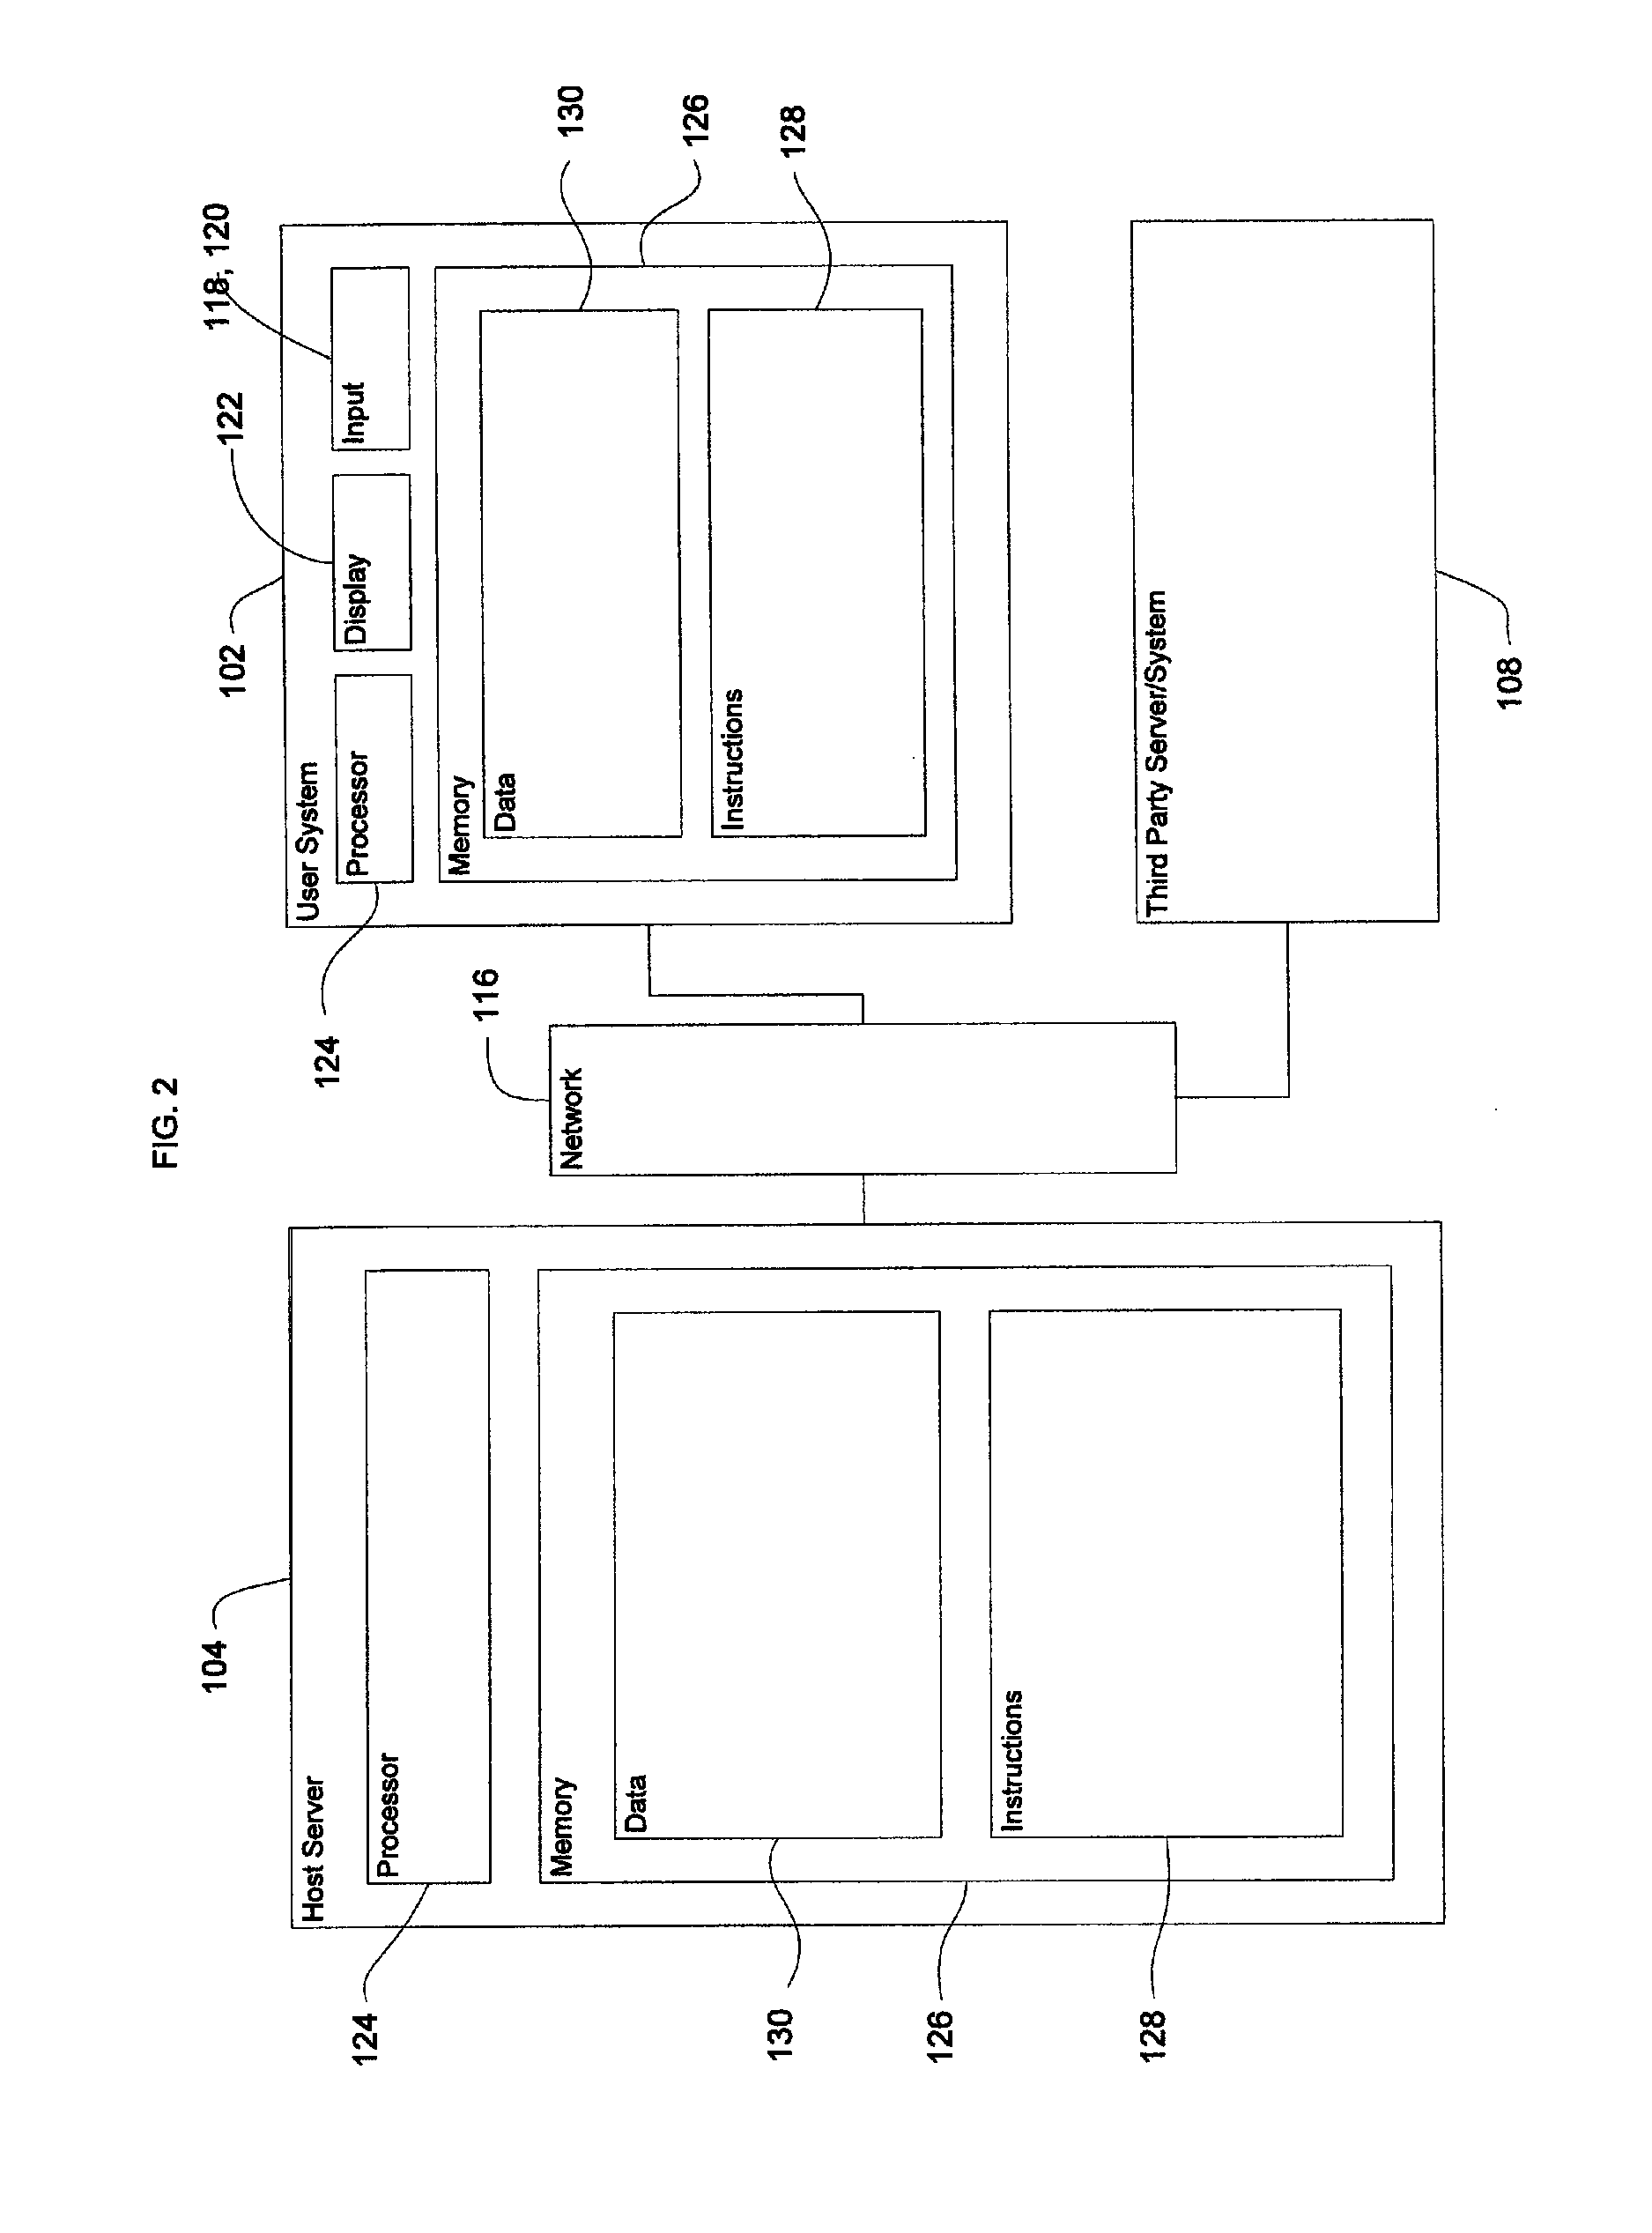 Systems and methods for verifying an electronic documents provenance date